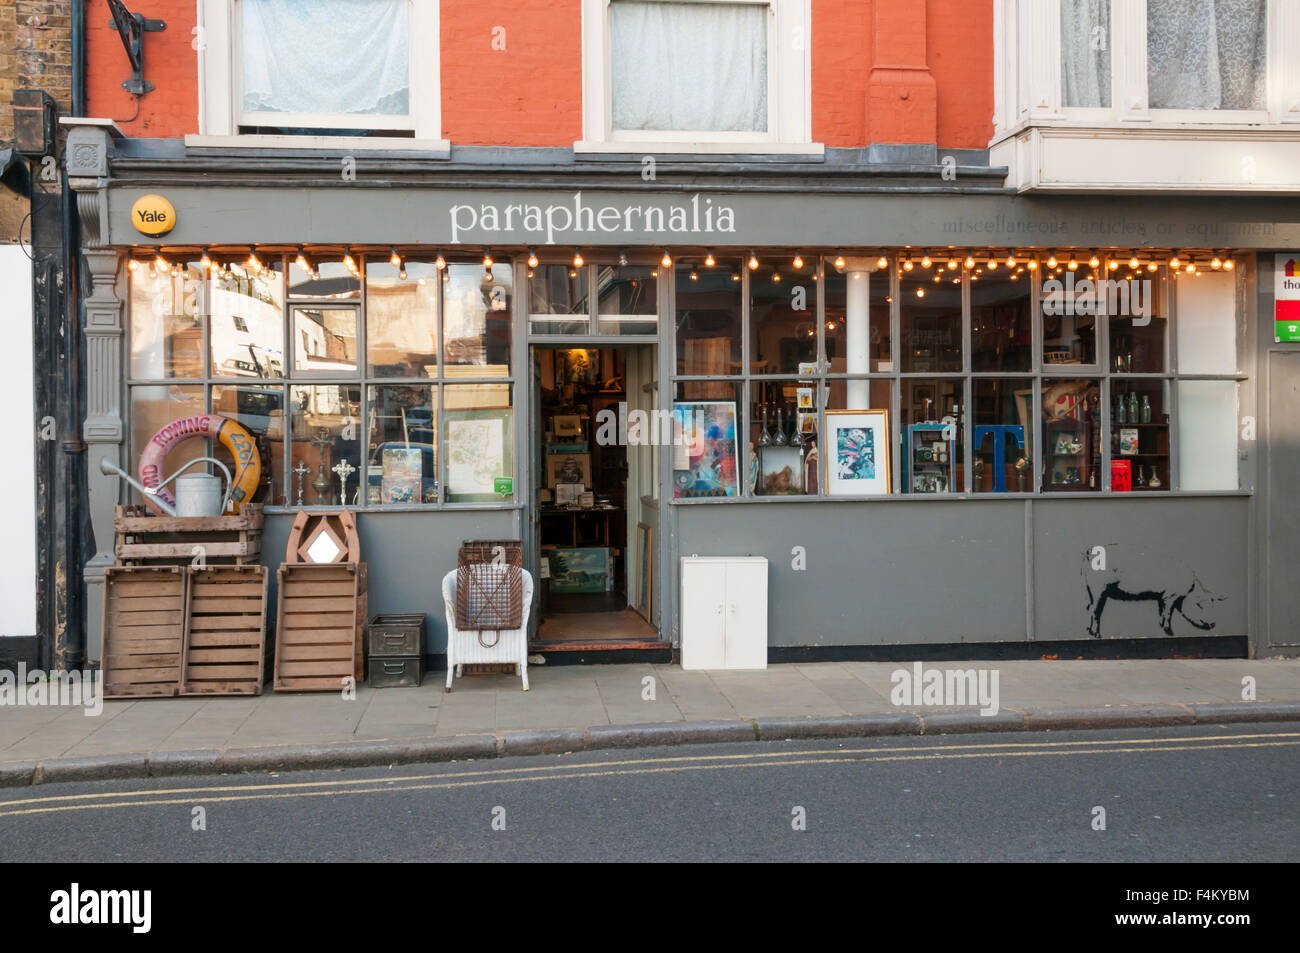 Paraphernalia shop in Margate's old town, with graffiti of a pig by Stewy. Stock Photo